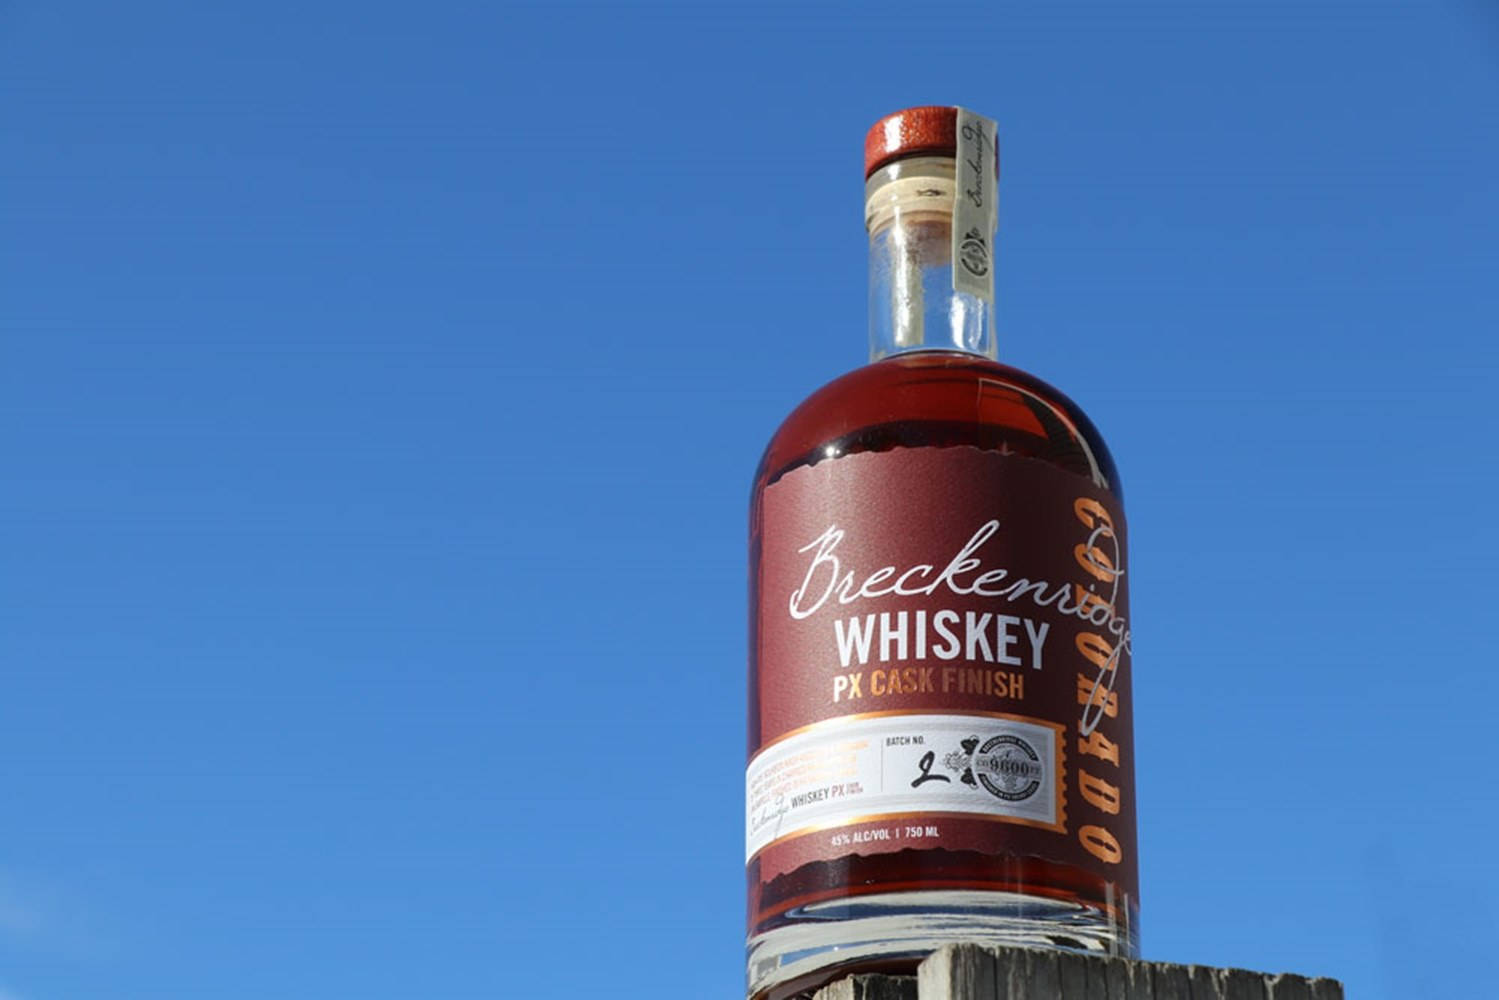 Breckenridgedistillery Whiskey Px Cask Finish Would Translate To 